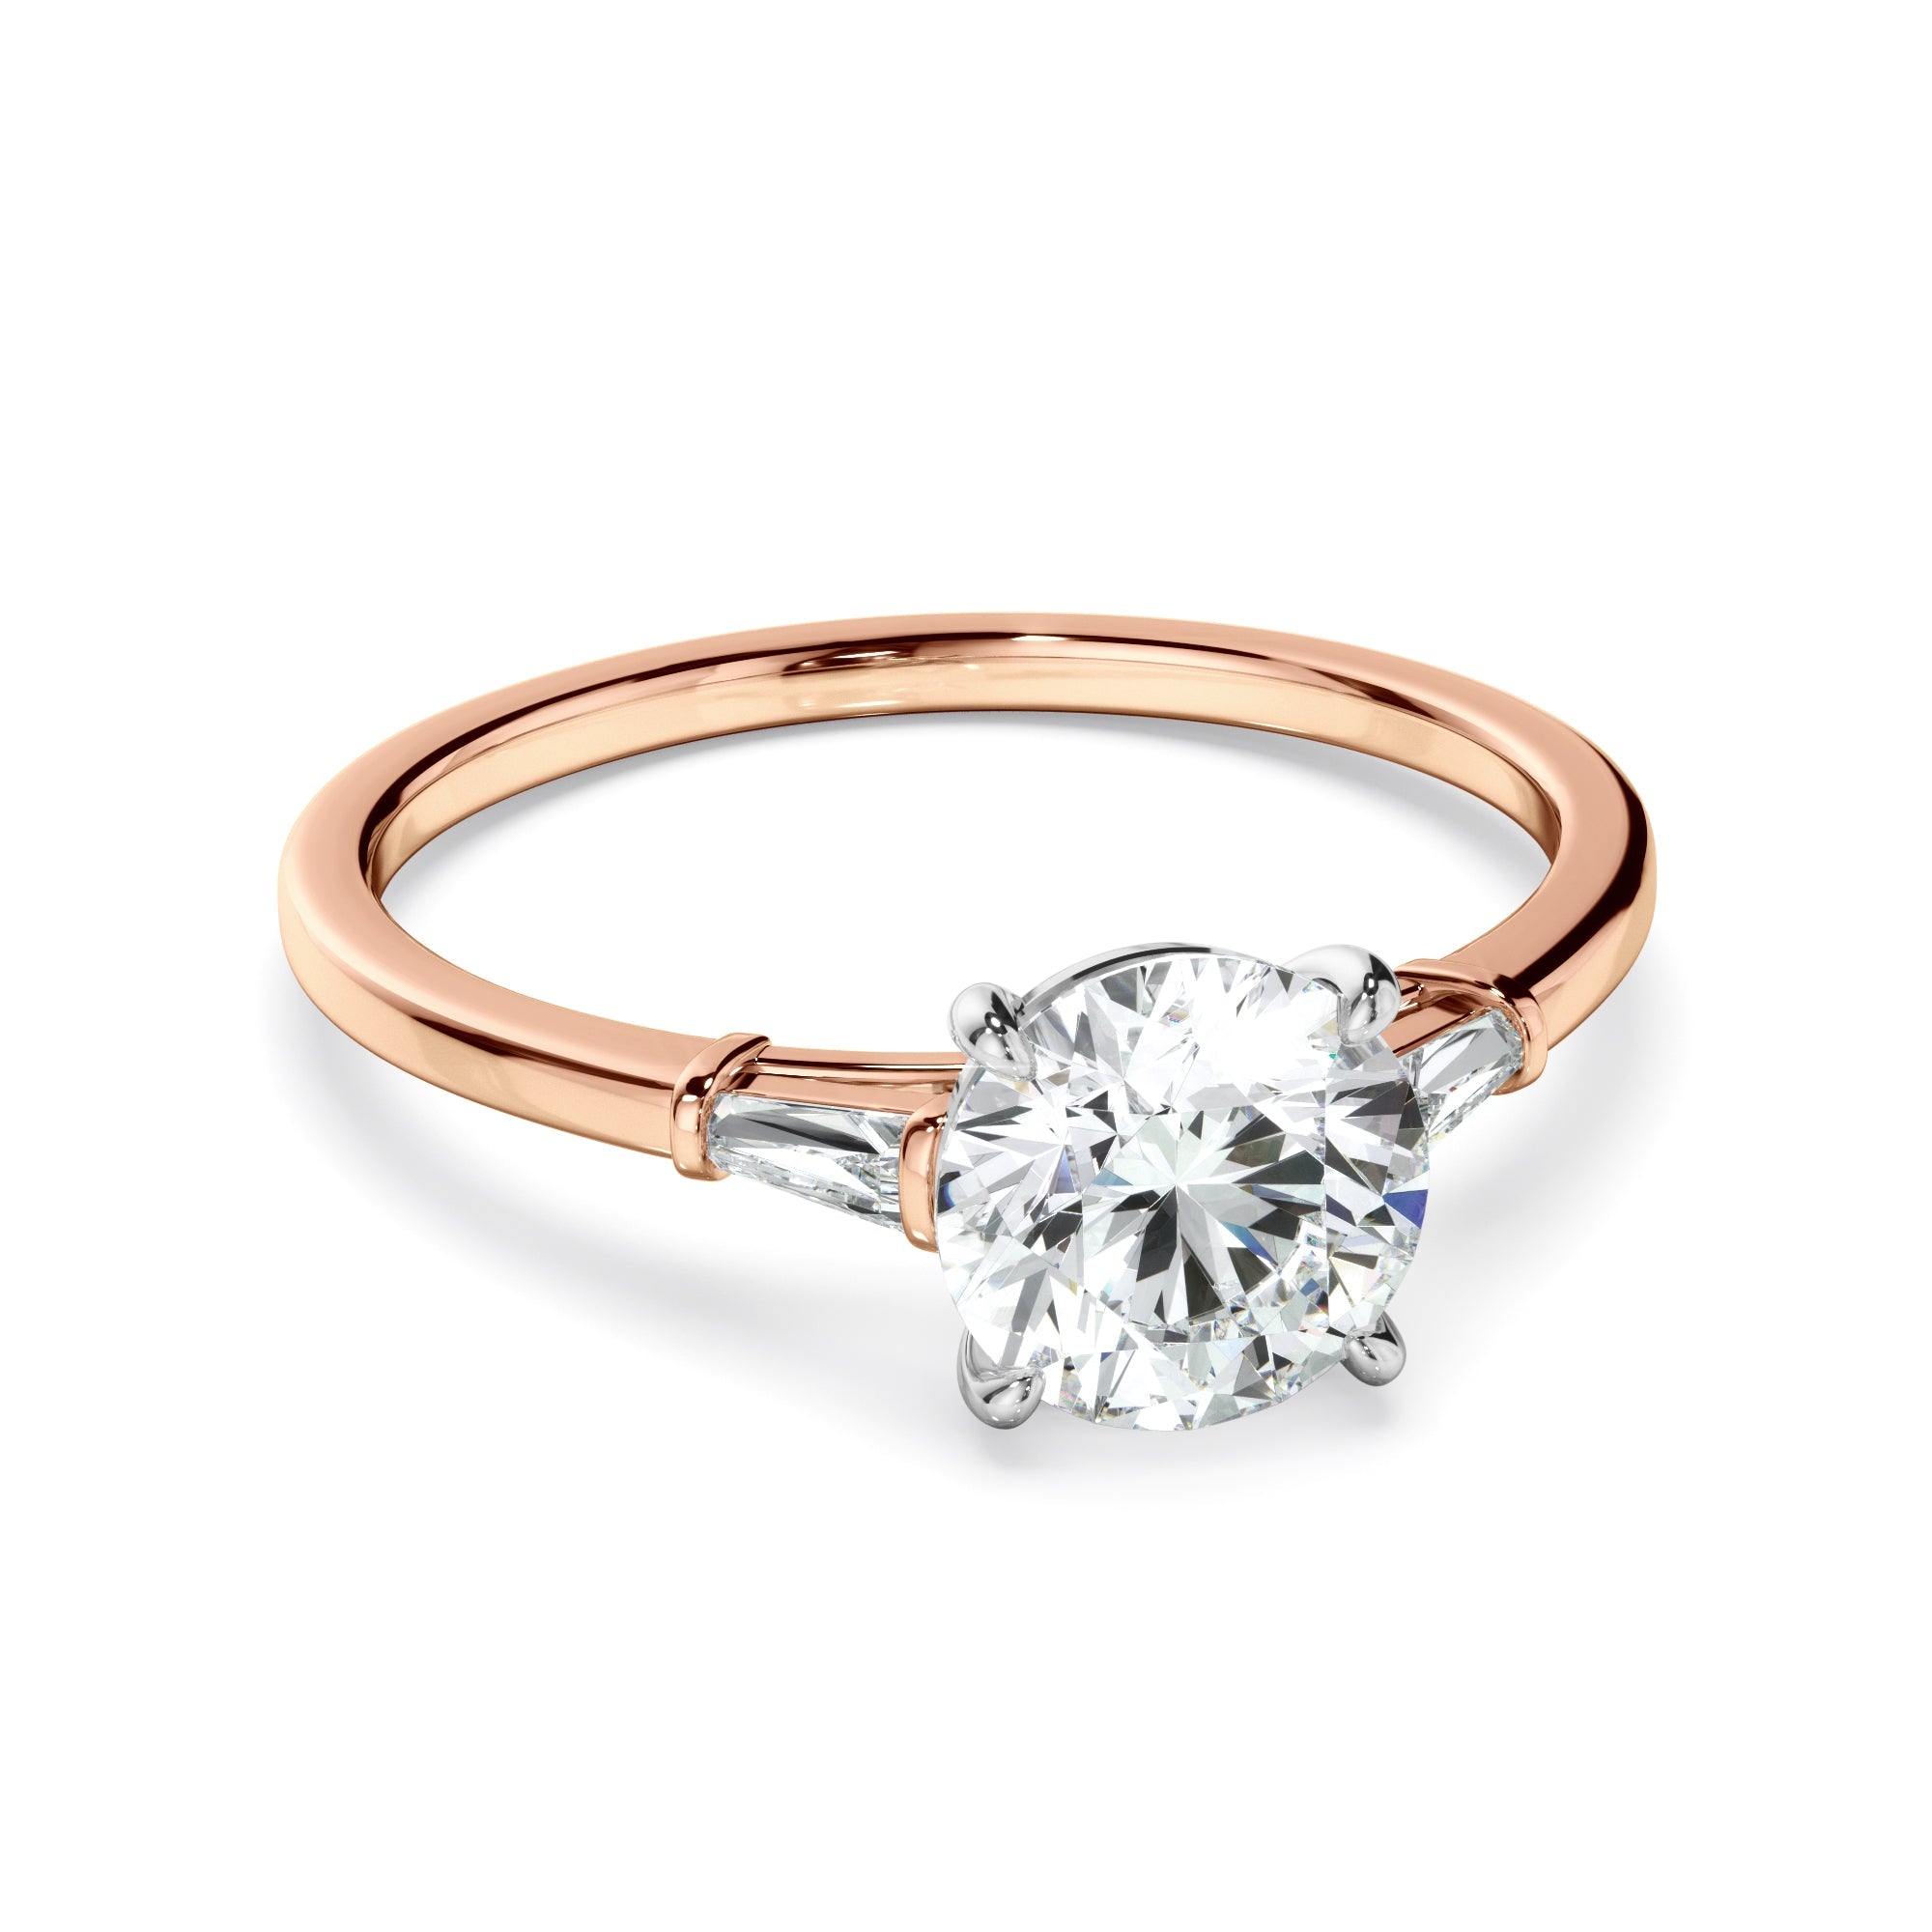 Round Brilliant Cut Diamond Engagement Ring With Baguette Sides